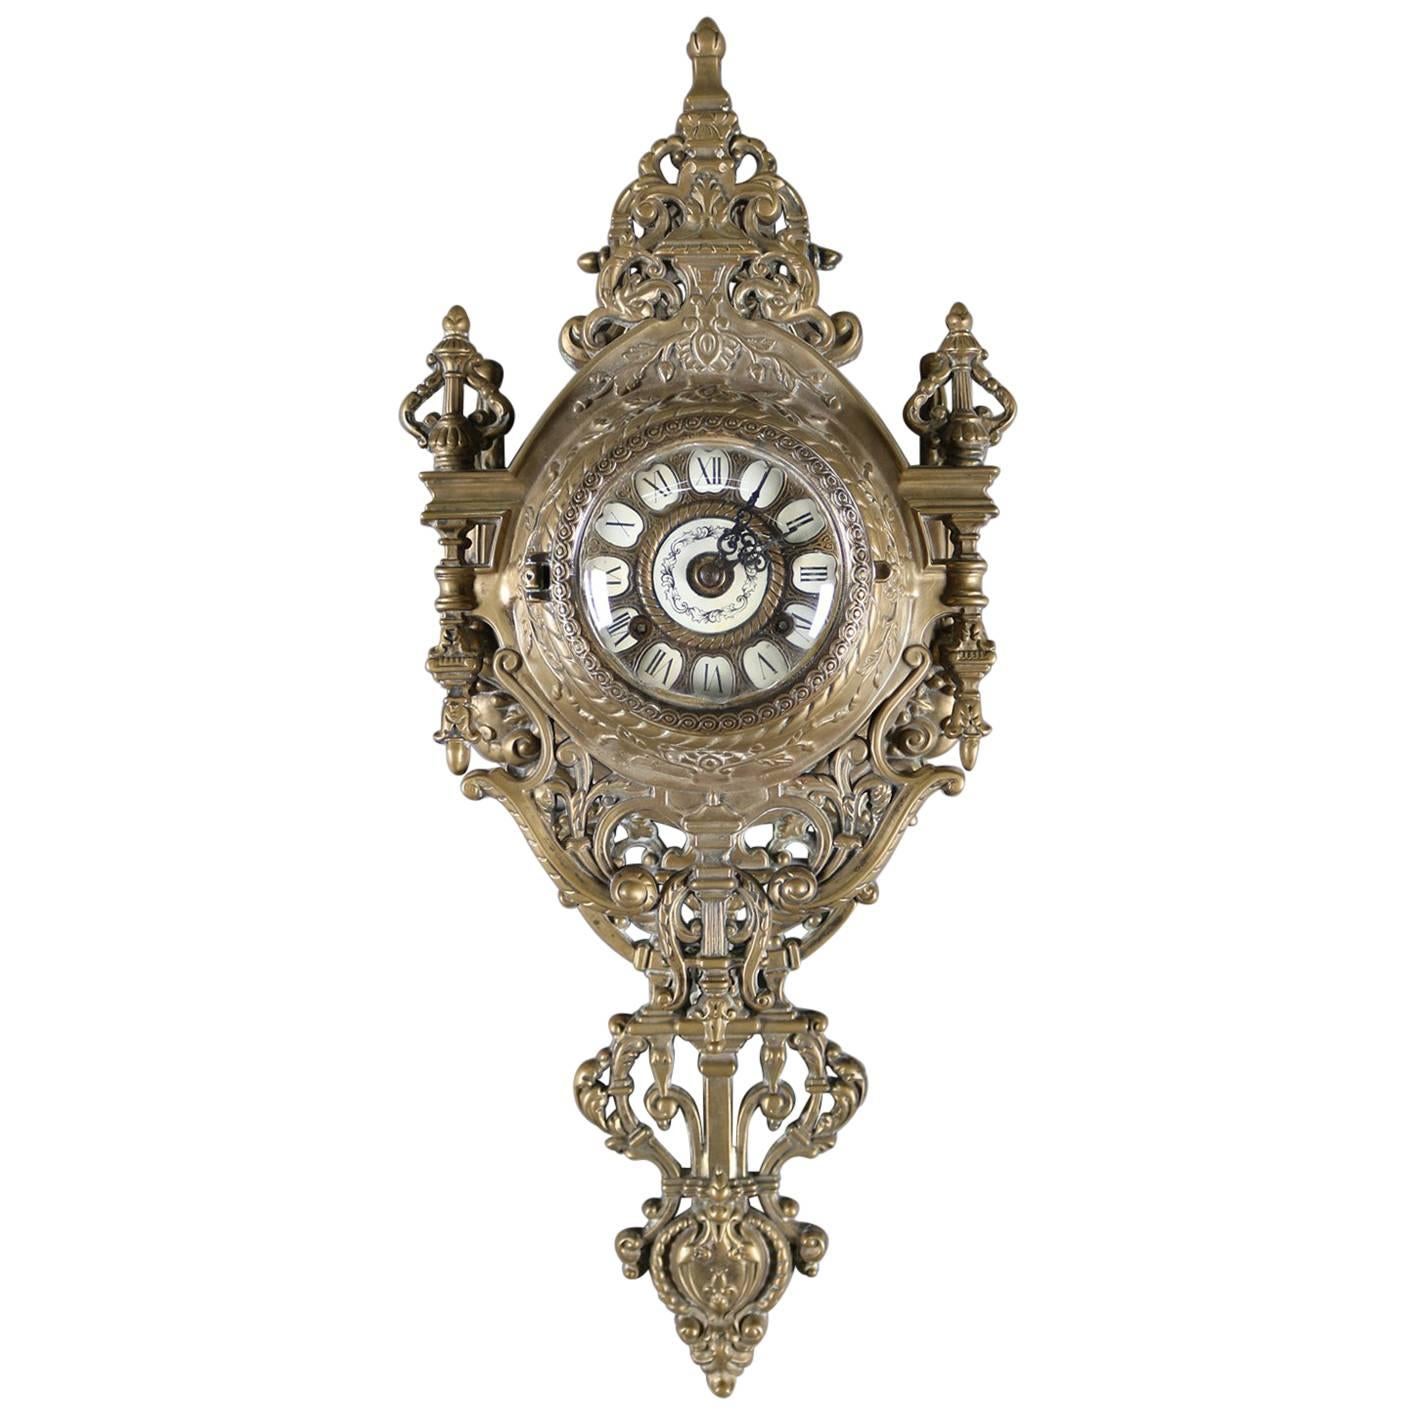 French Louis XIV Style Gilt Bronze Cartel Clock by Tiffany & Co., 20th Century